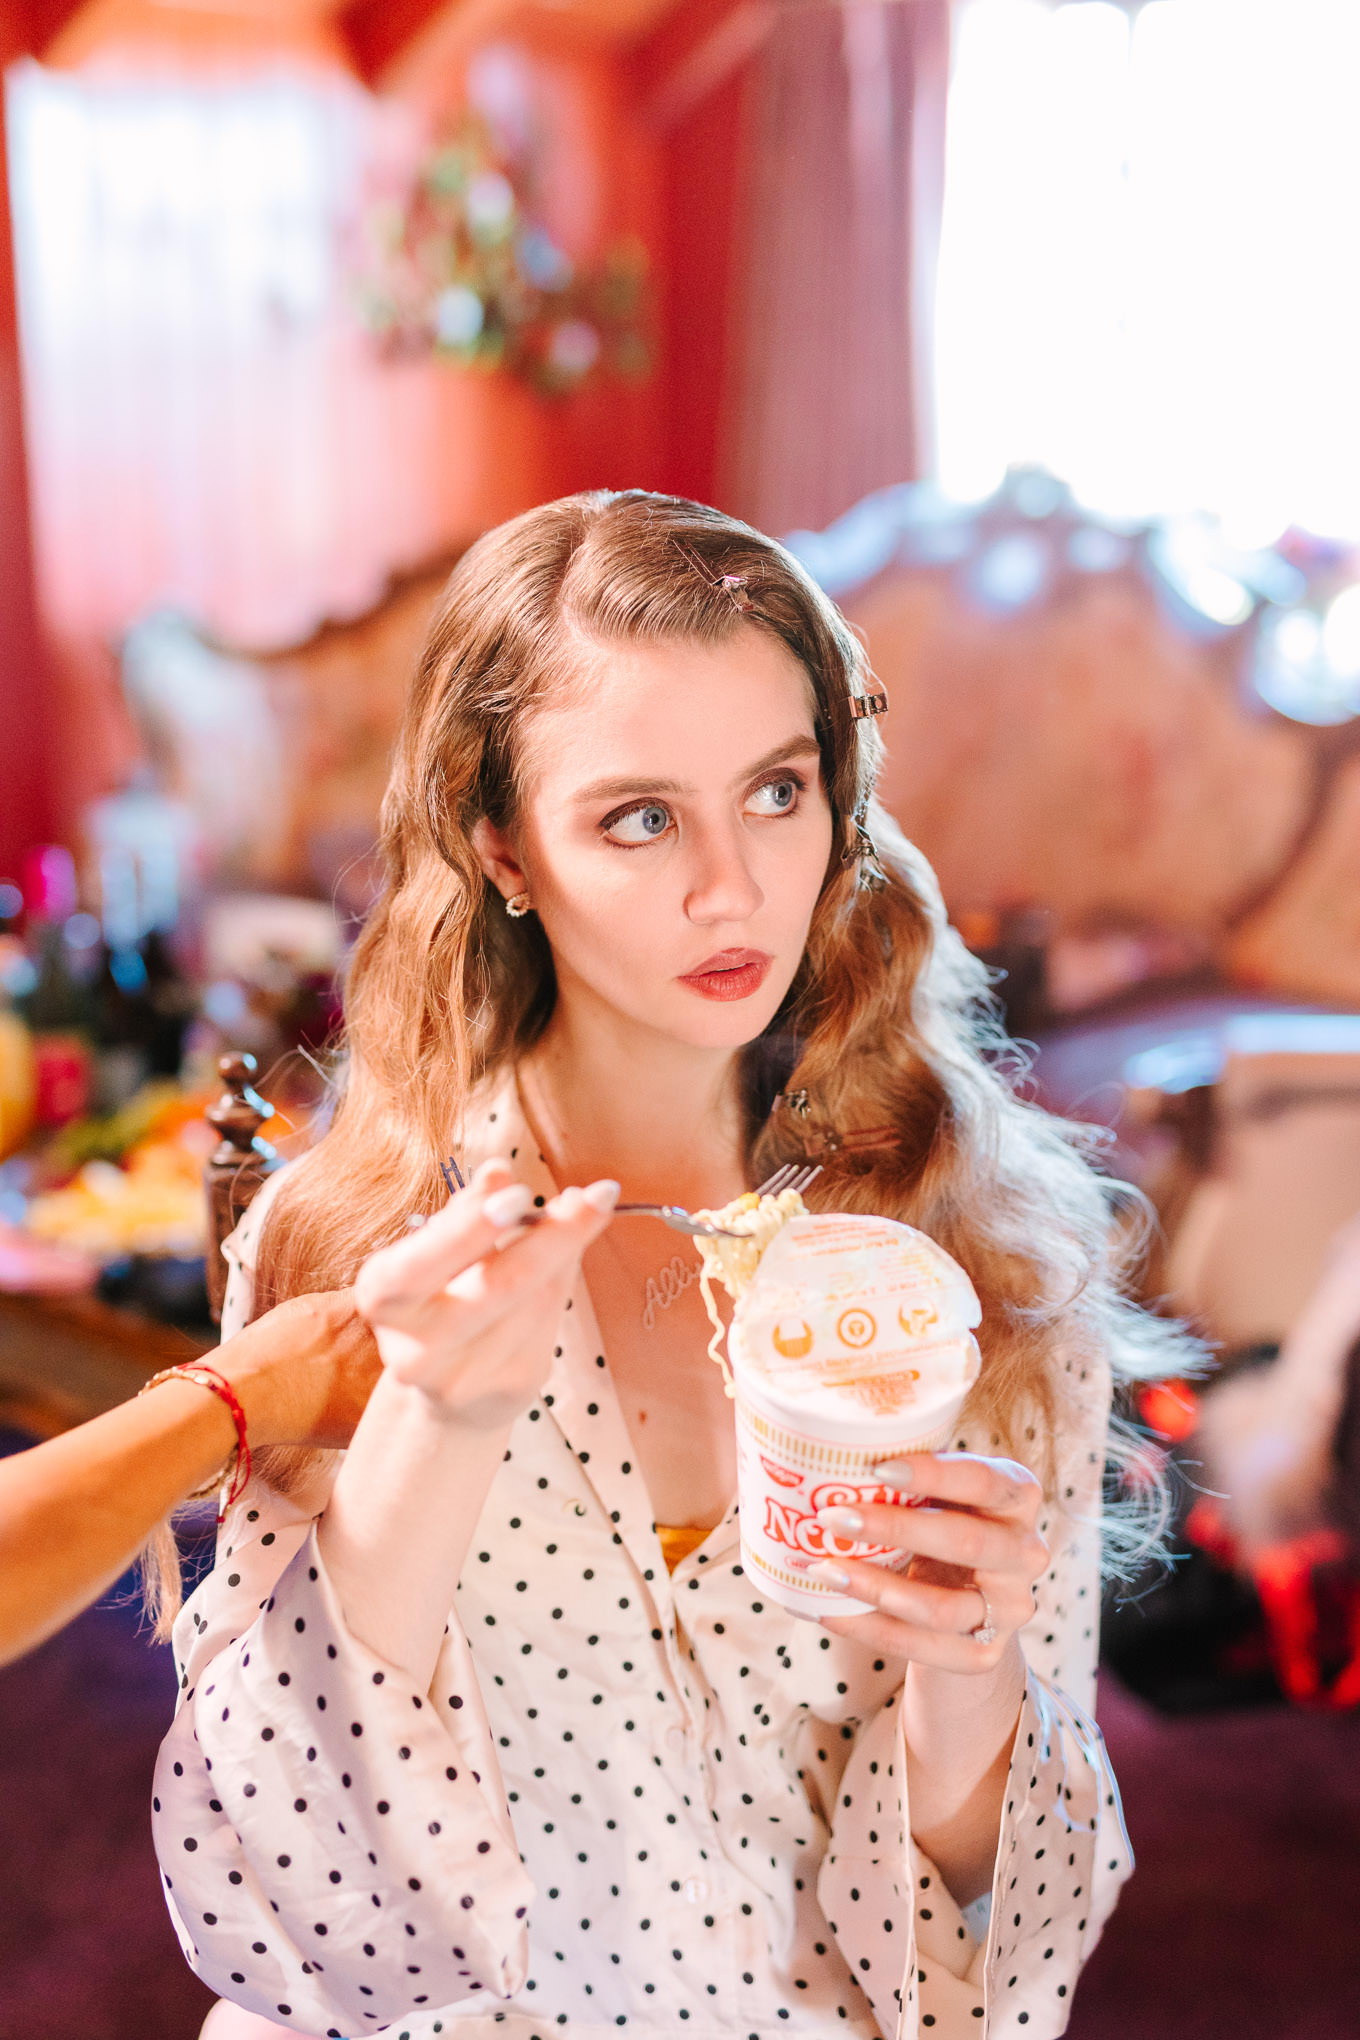 Bride Allison Harvard getting ready on her wedding day with a cup of noodles | Colorful and quirky wedding at Higuera Ranch in San Luis Obispo | #sanluisobispowedding #californiawedding #higueraranch #madonnainn   
Source: Mary Costa Photography | Los Angeles